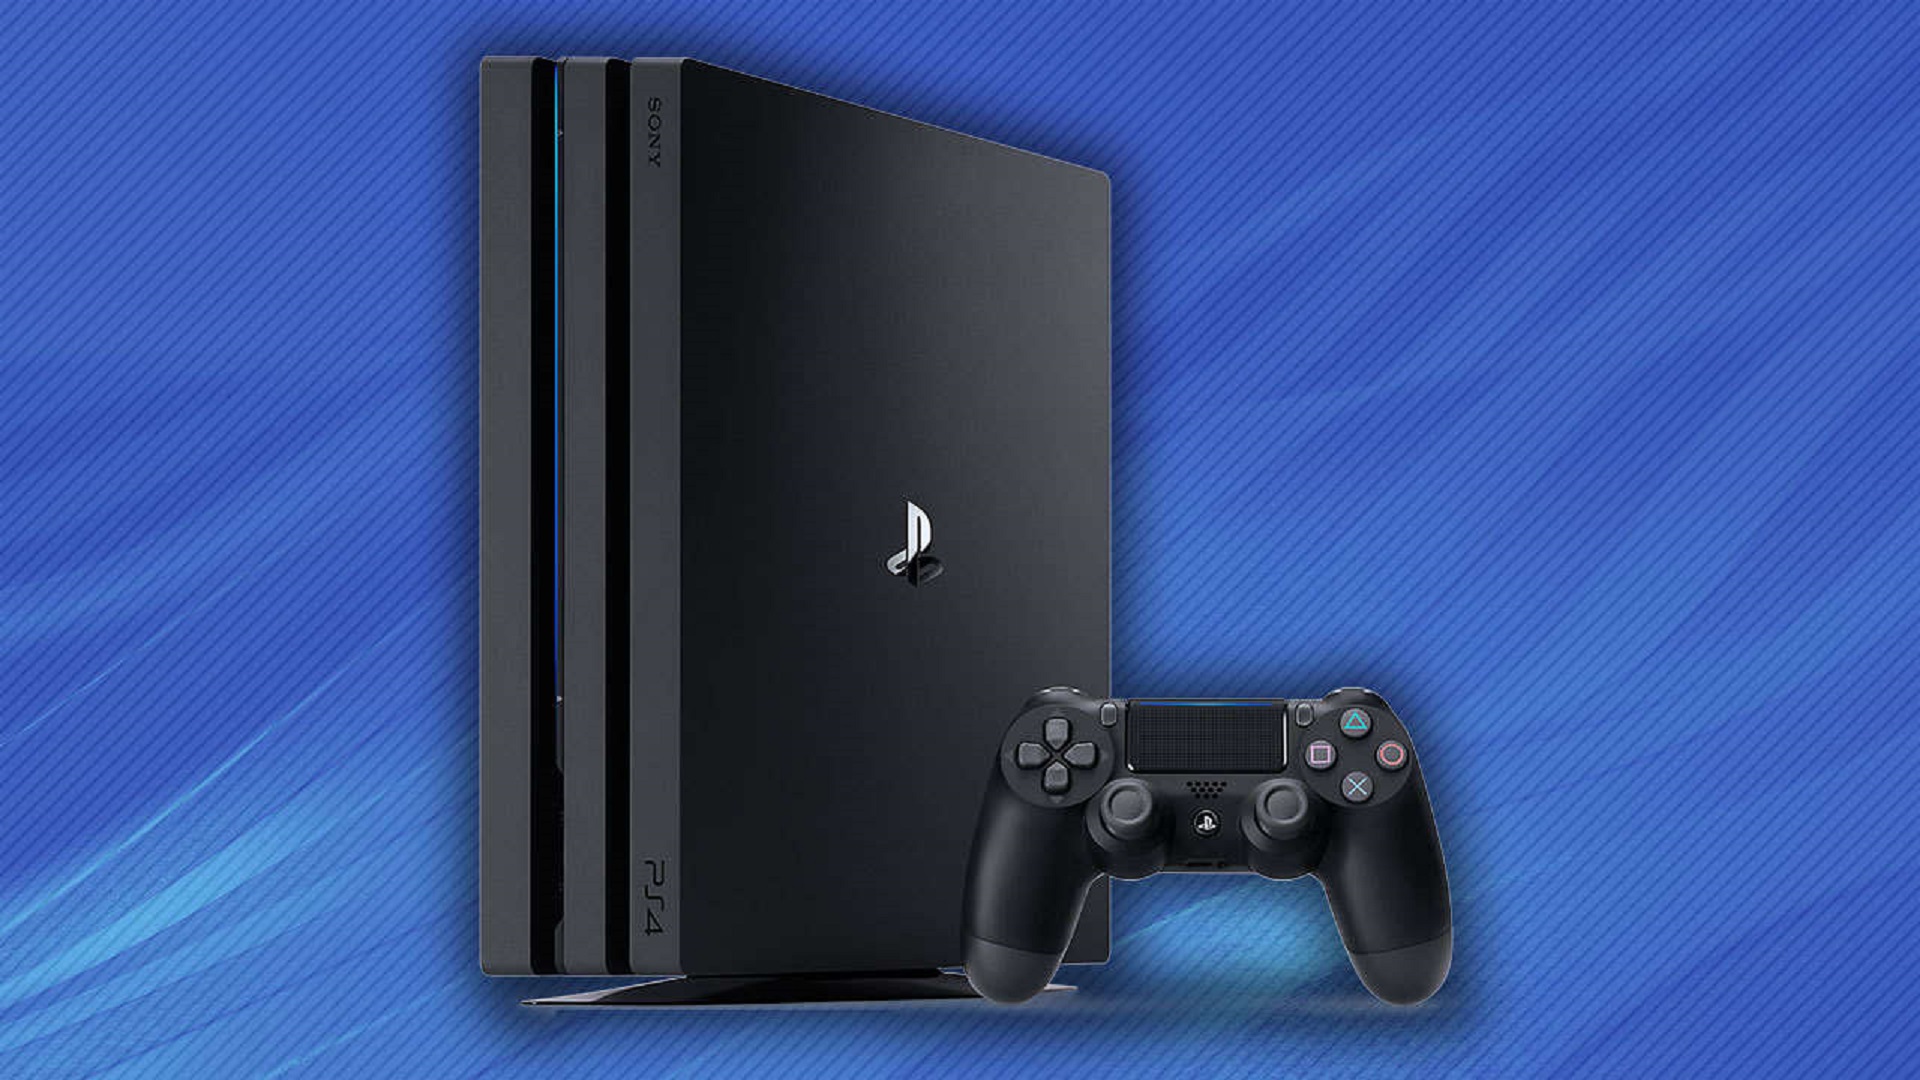 Www ps4. Сони ПС 4. Sony PLAYSTATION ps4 Pro. Sony PLAYSTATION 4 Pro 1tb. Sony PLAYSTATION 4 ps4.